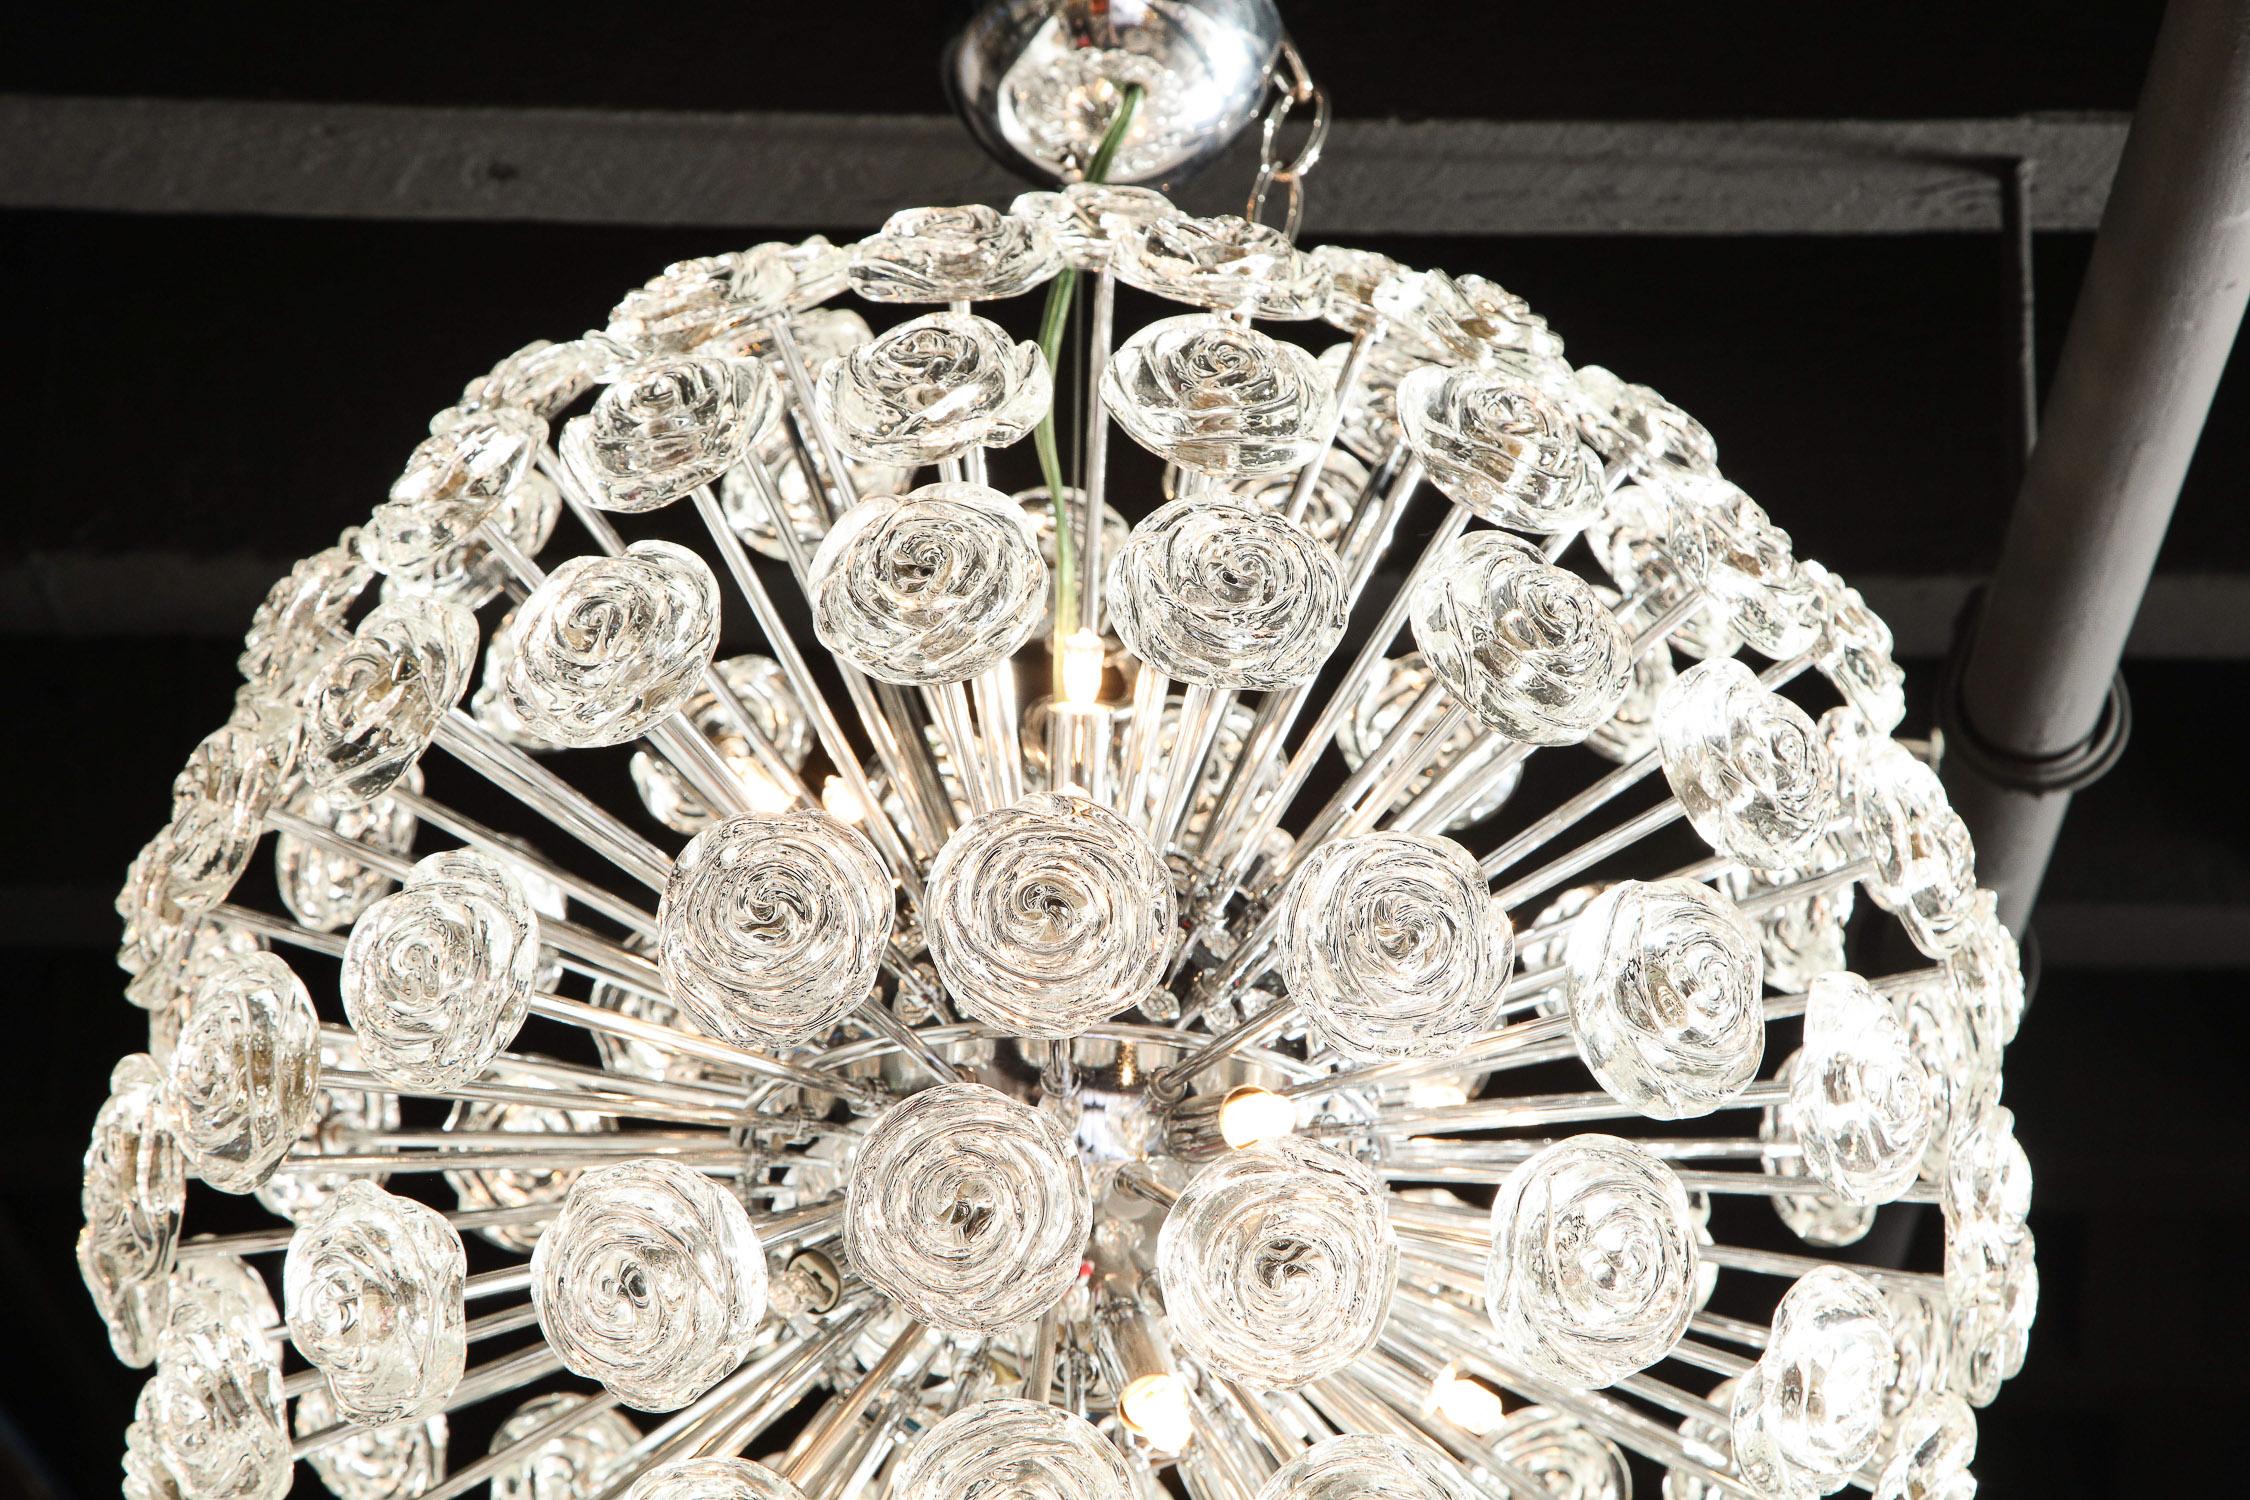 Hand-Crafted Chandelier with Glass Roses, Midcentury Design, Large Chrome Sphere, Italy For Sale